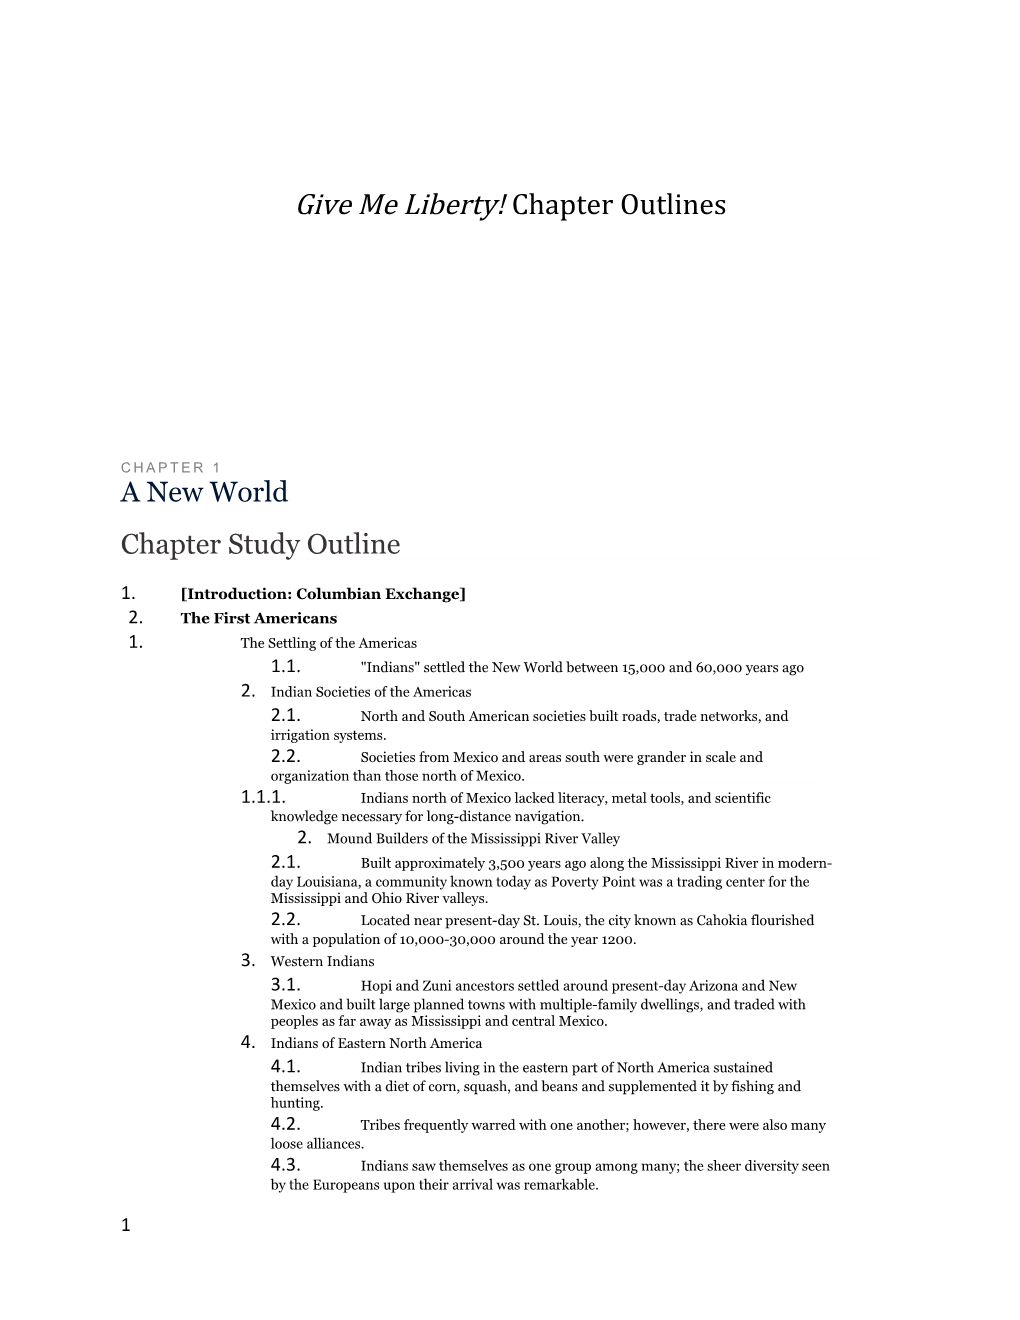 Give Me Liberty! Chapter Outlines